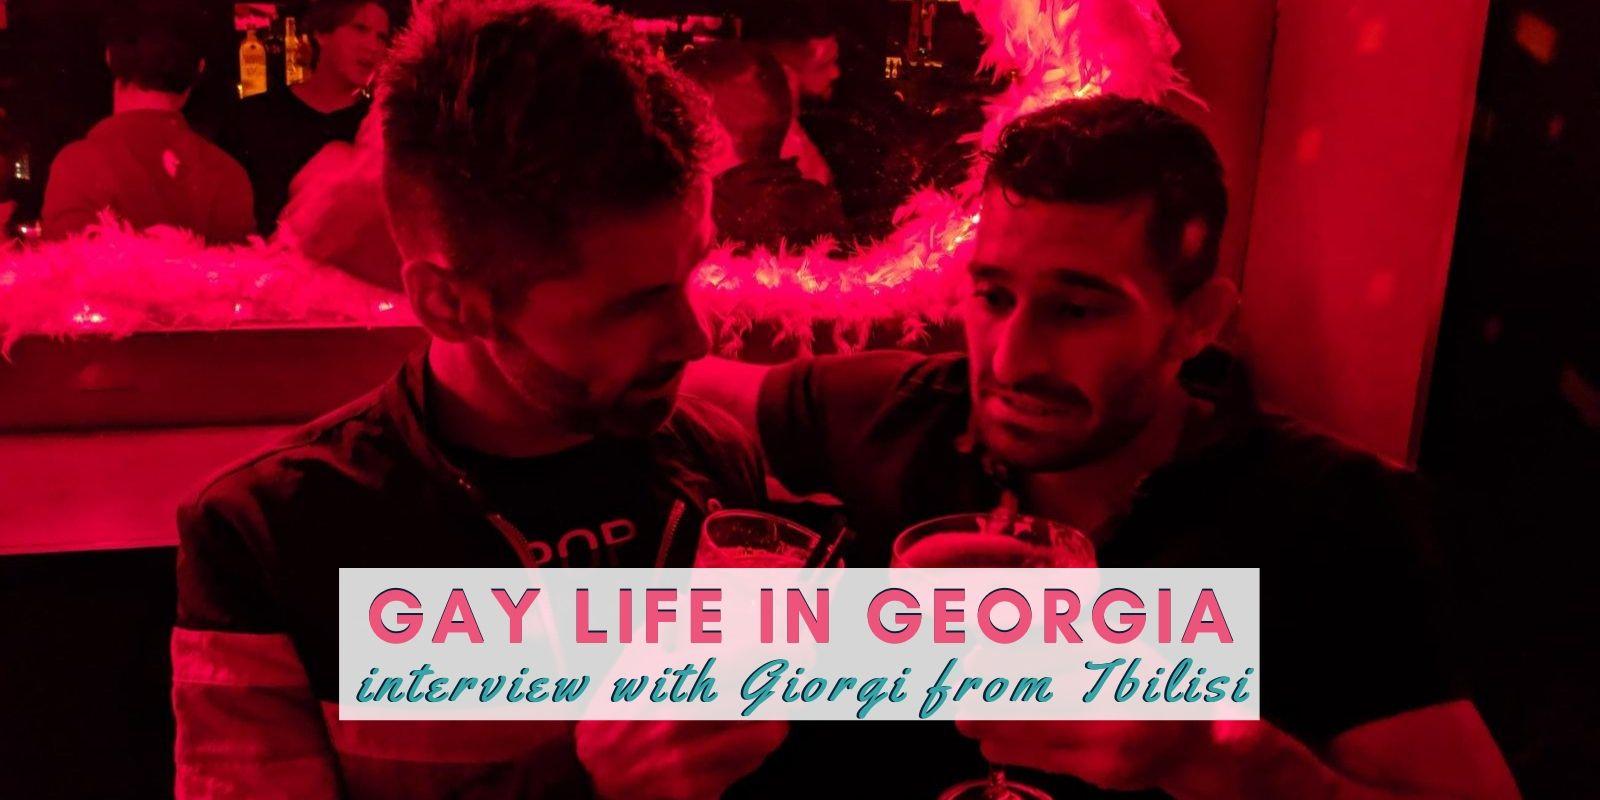 Find out what it's like to grow up gay in the country of Georgia in our interview with Vato from Tbilisi